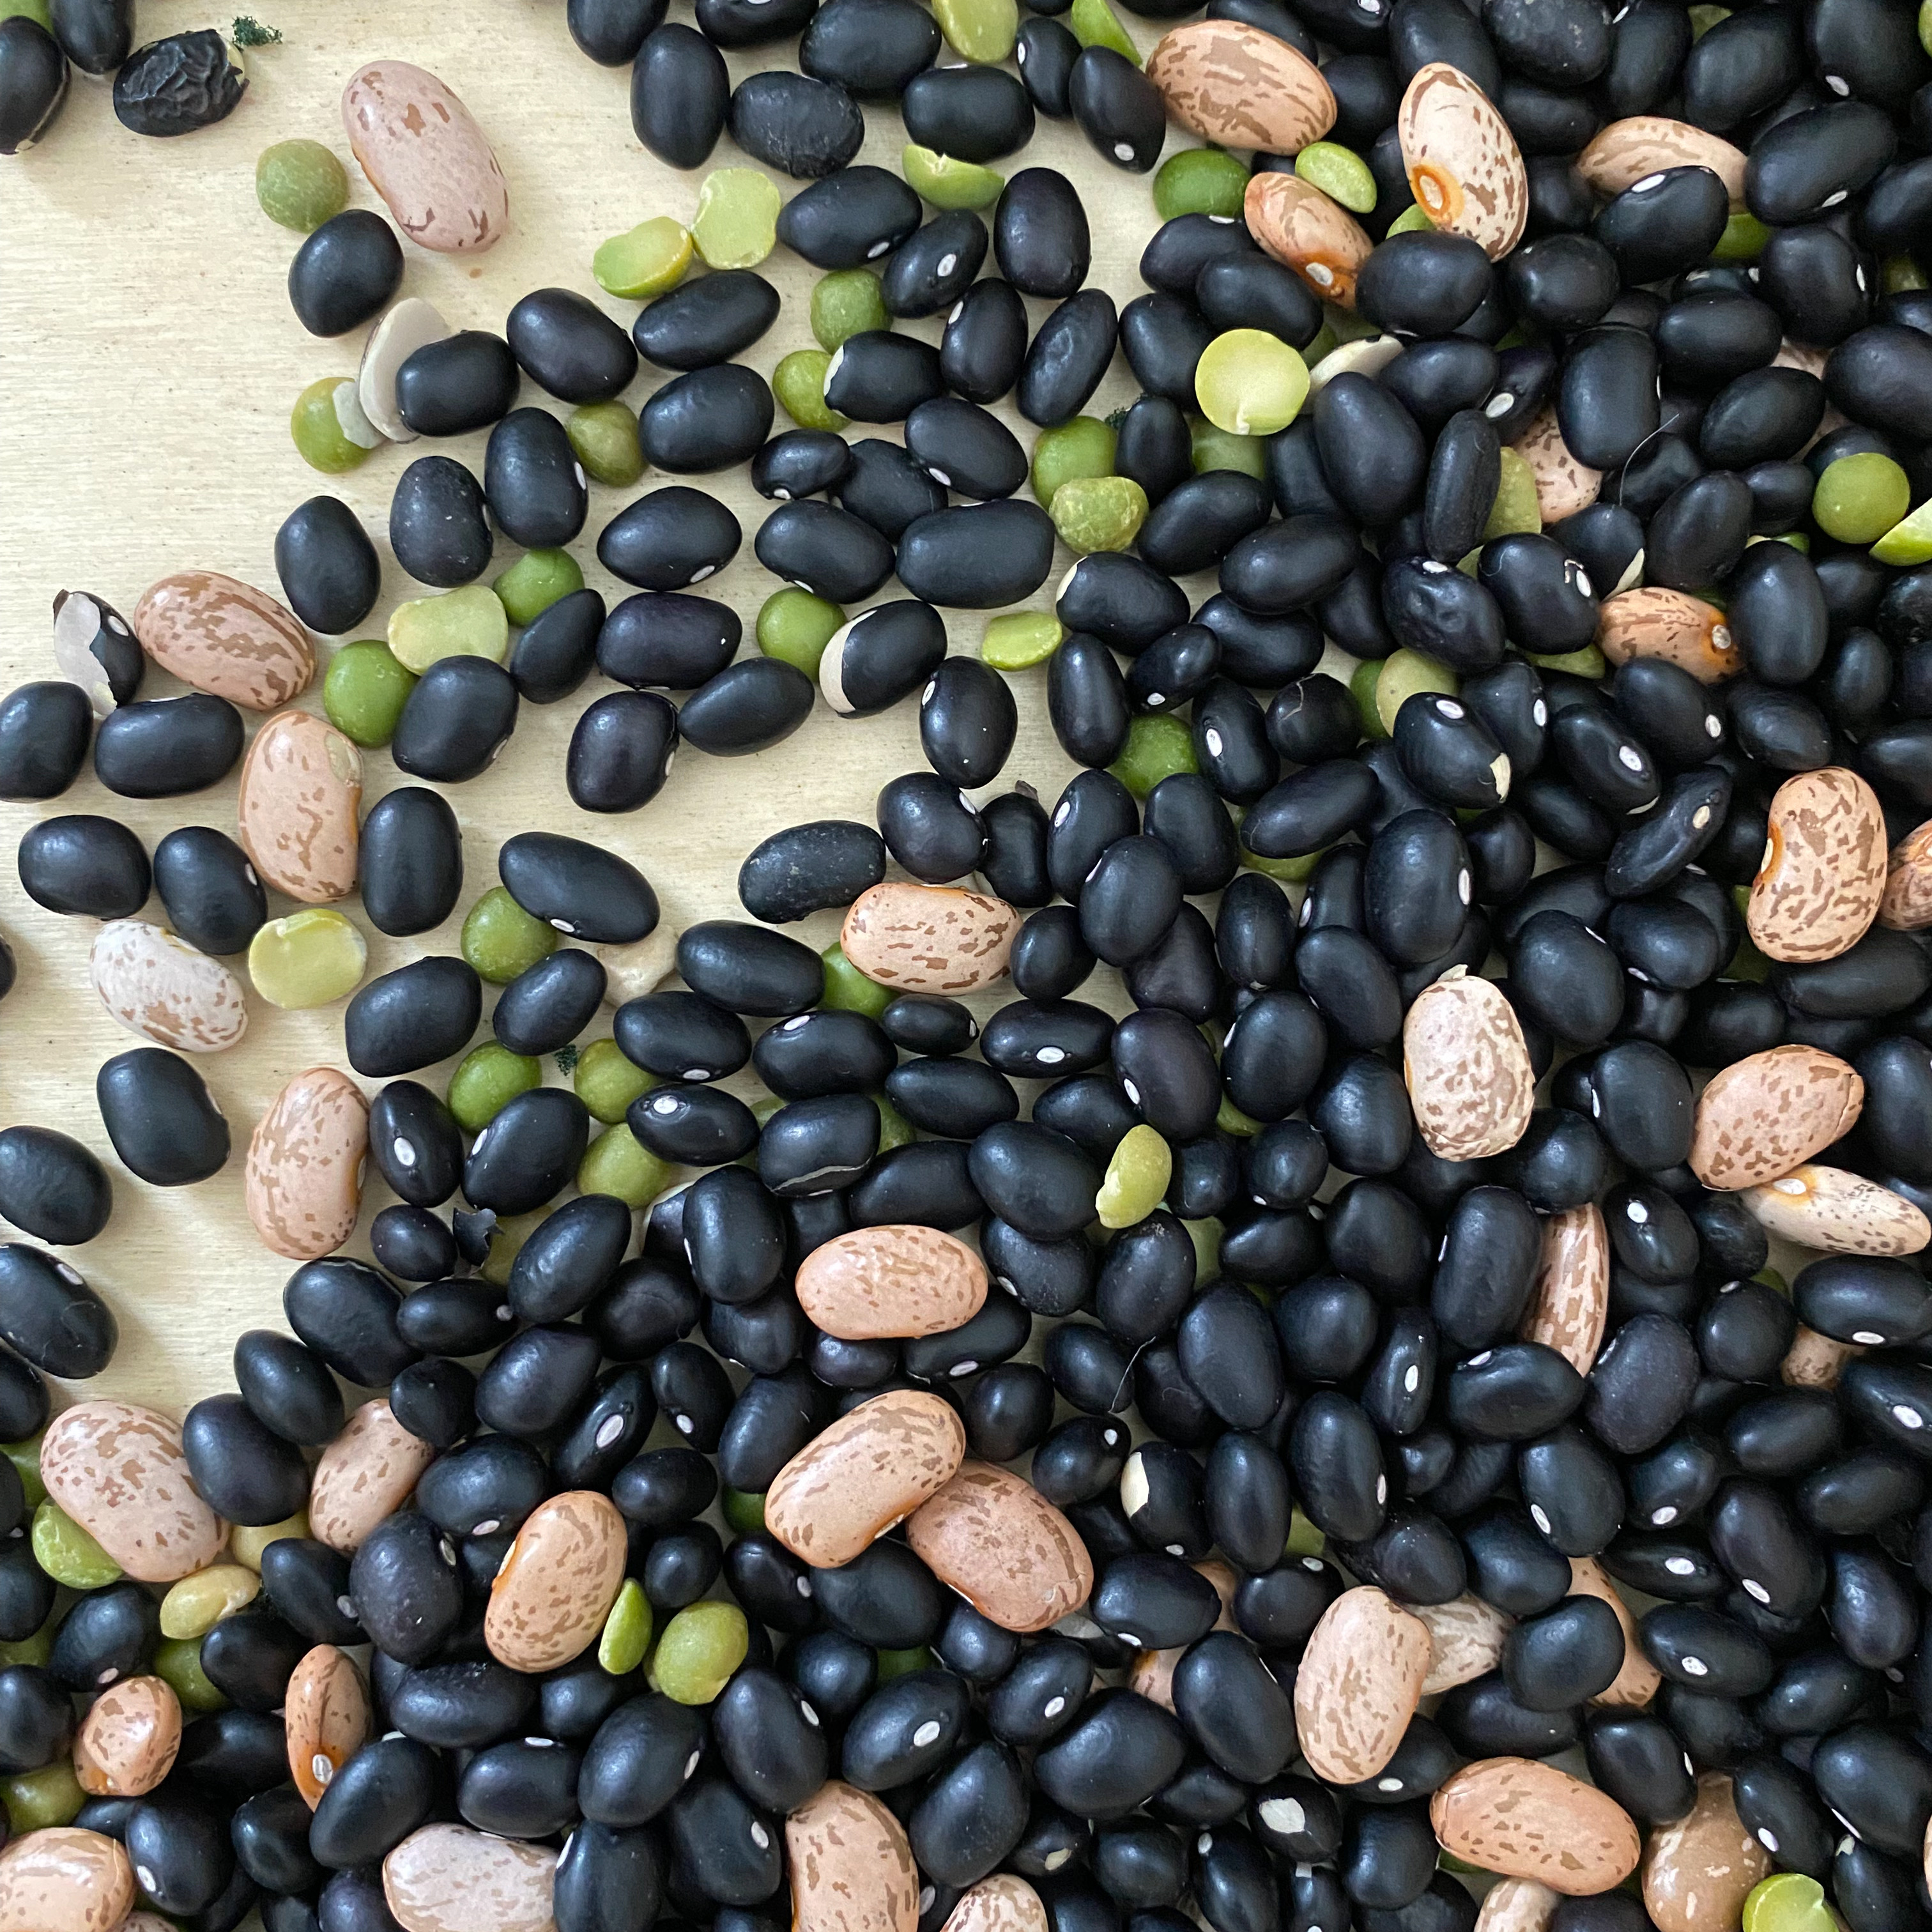 Dinosaur bin filler: primarily dried black beans with scattered pinto beans and green split peas.